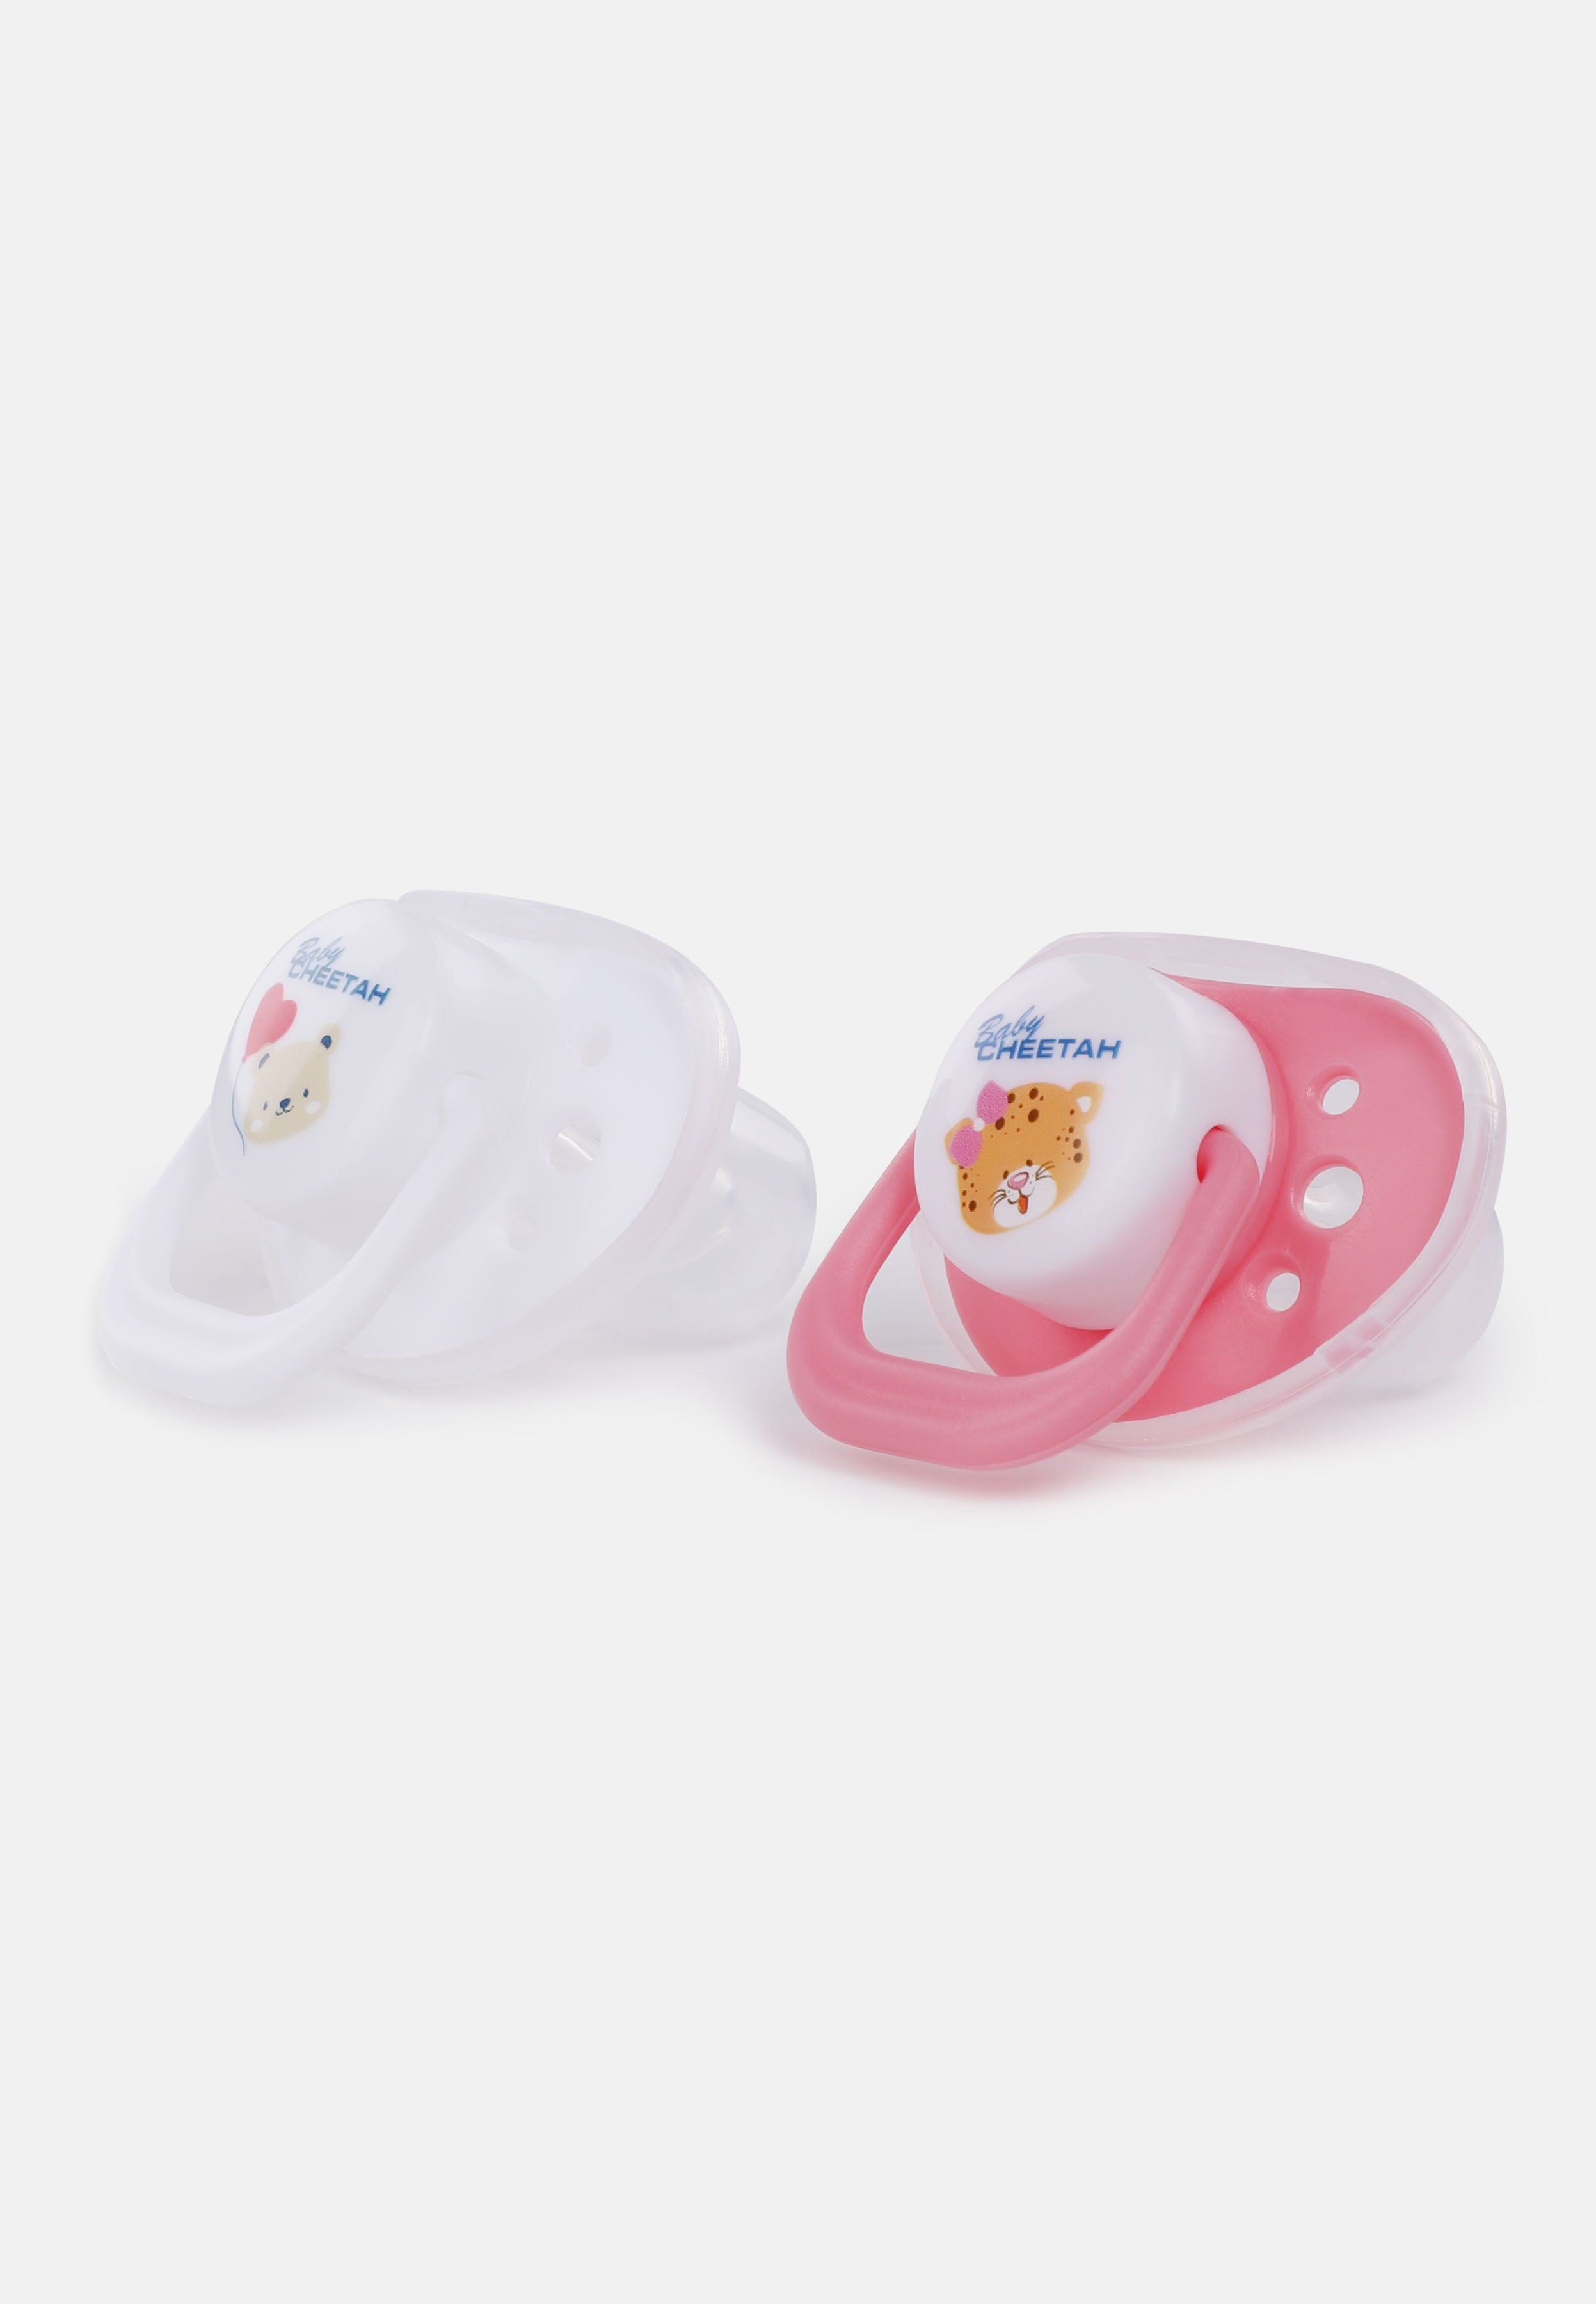 Baby Cheetah Soother with Case (2 IN 1) - Orthodontic Teats (0-6M) - CBB-ST21086